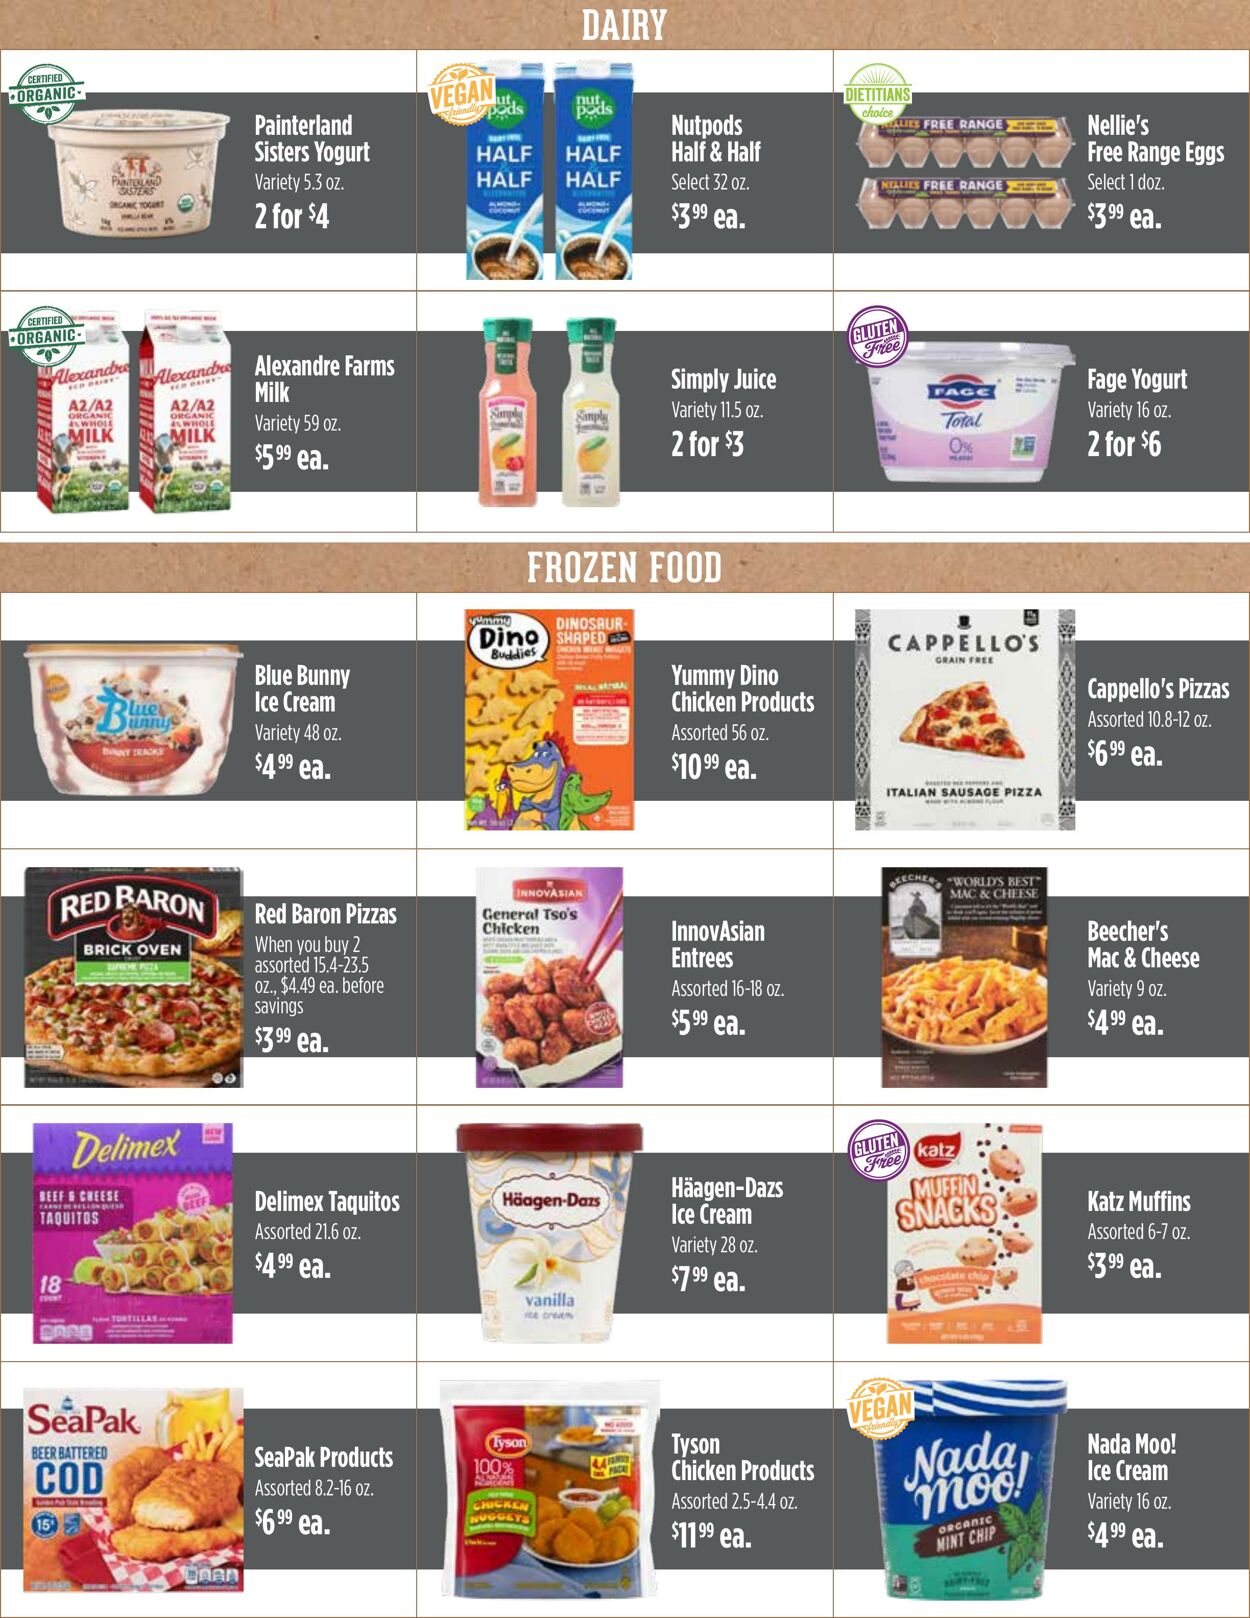 Weekly ad Harmons Grocery 05/14/2024 - 05/20/2024